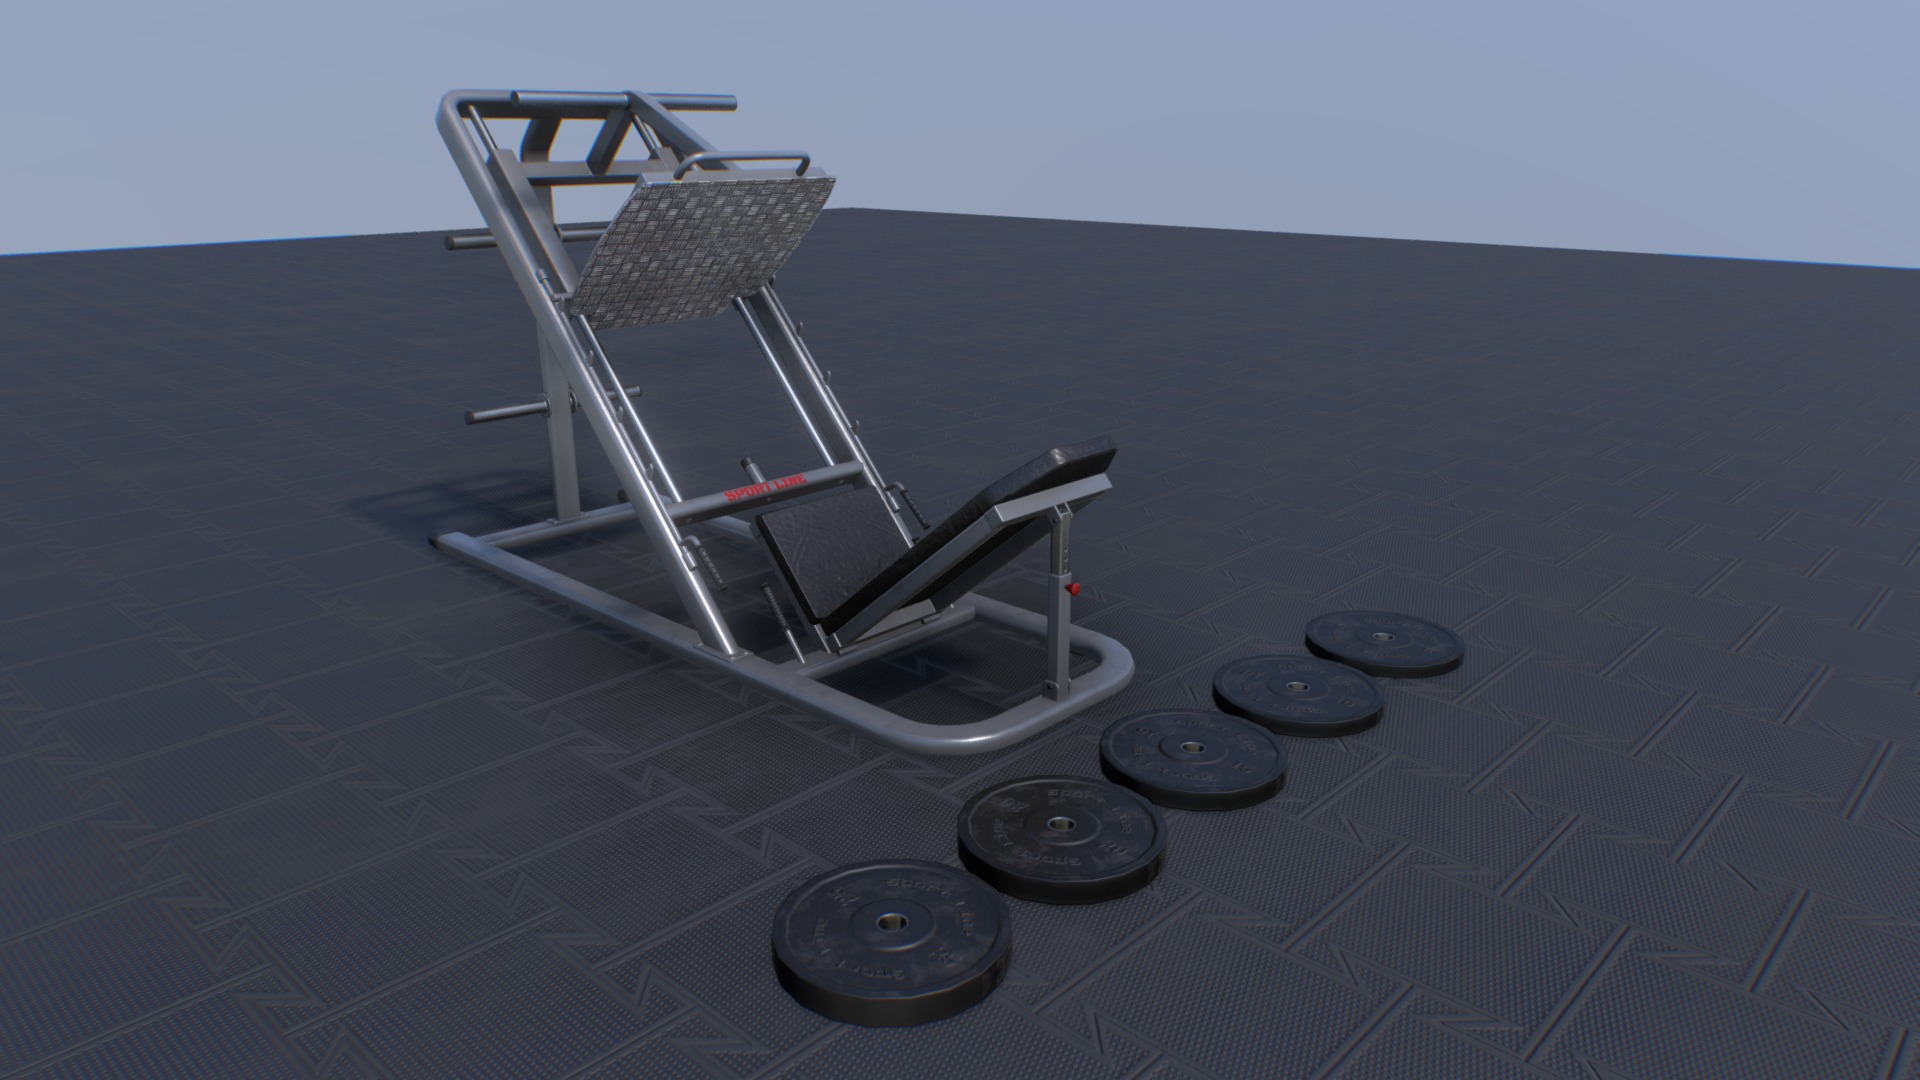 3D model Leg Press Hack Squat - This is a 3D model of the Leg Press Hack Squat. The 3D model is about a chair on a table.